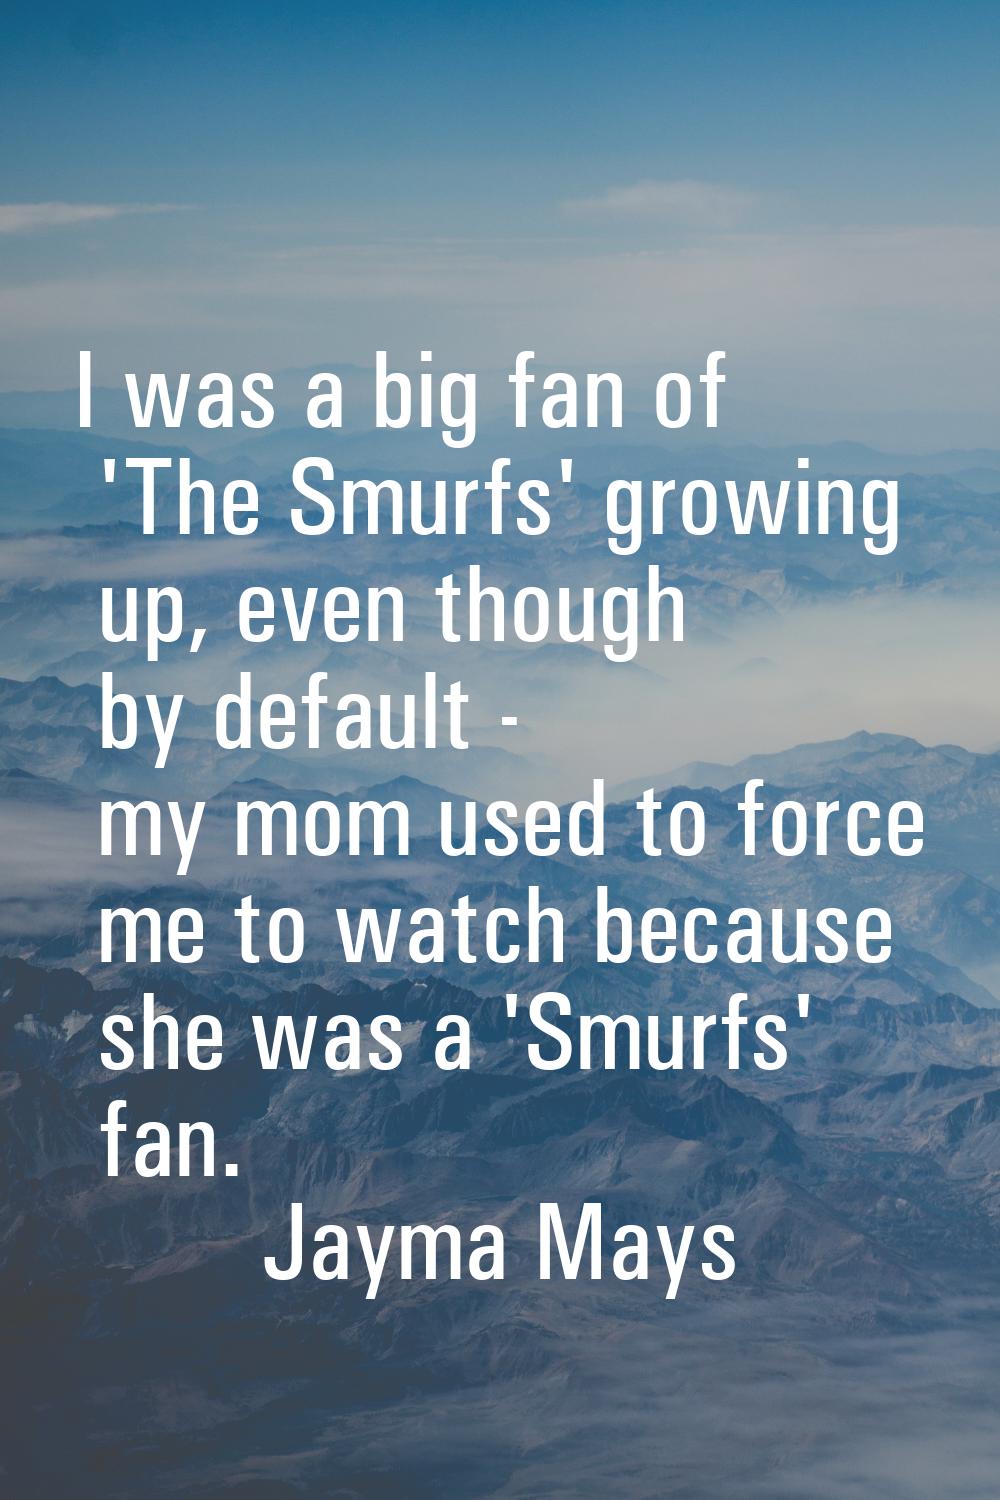 I was a big fan of 'The Smurfs' growing up, even though by default - my mom used to force me to wat